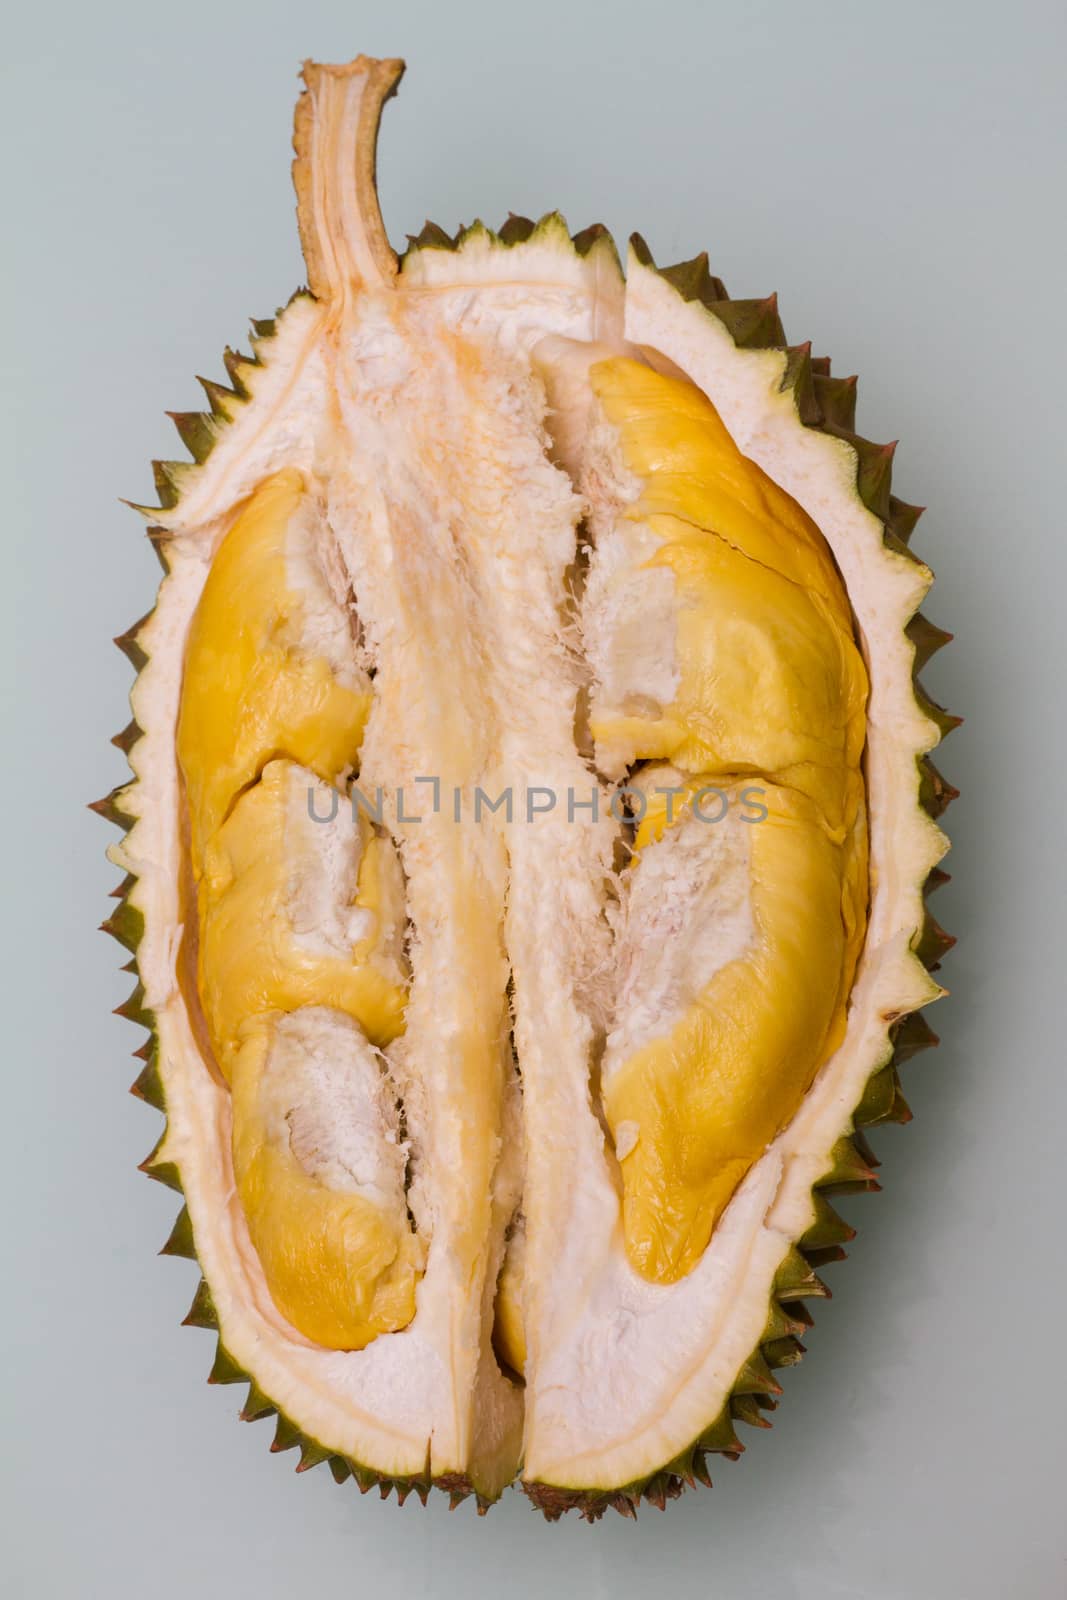 Tropical fruit Malaysia Durian in plain background